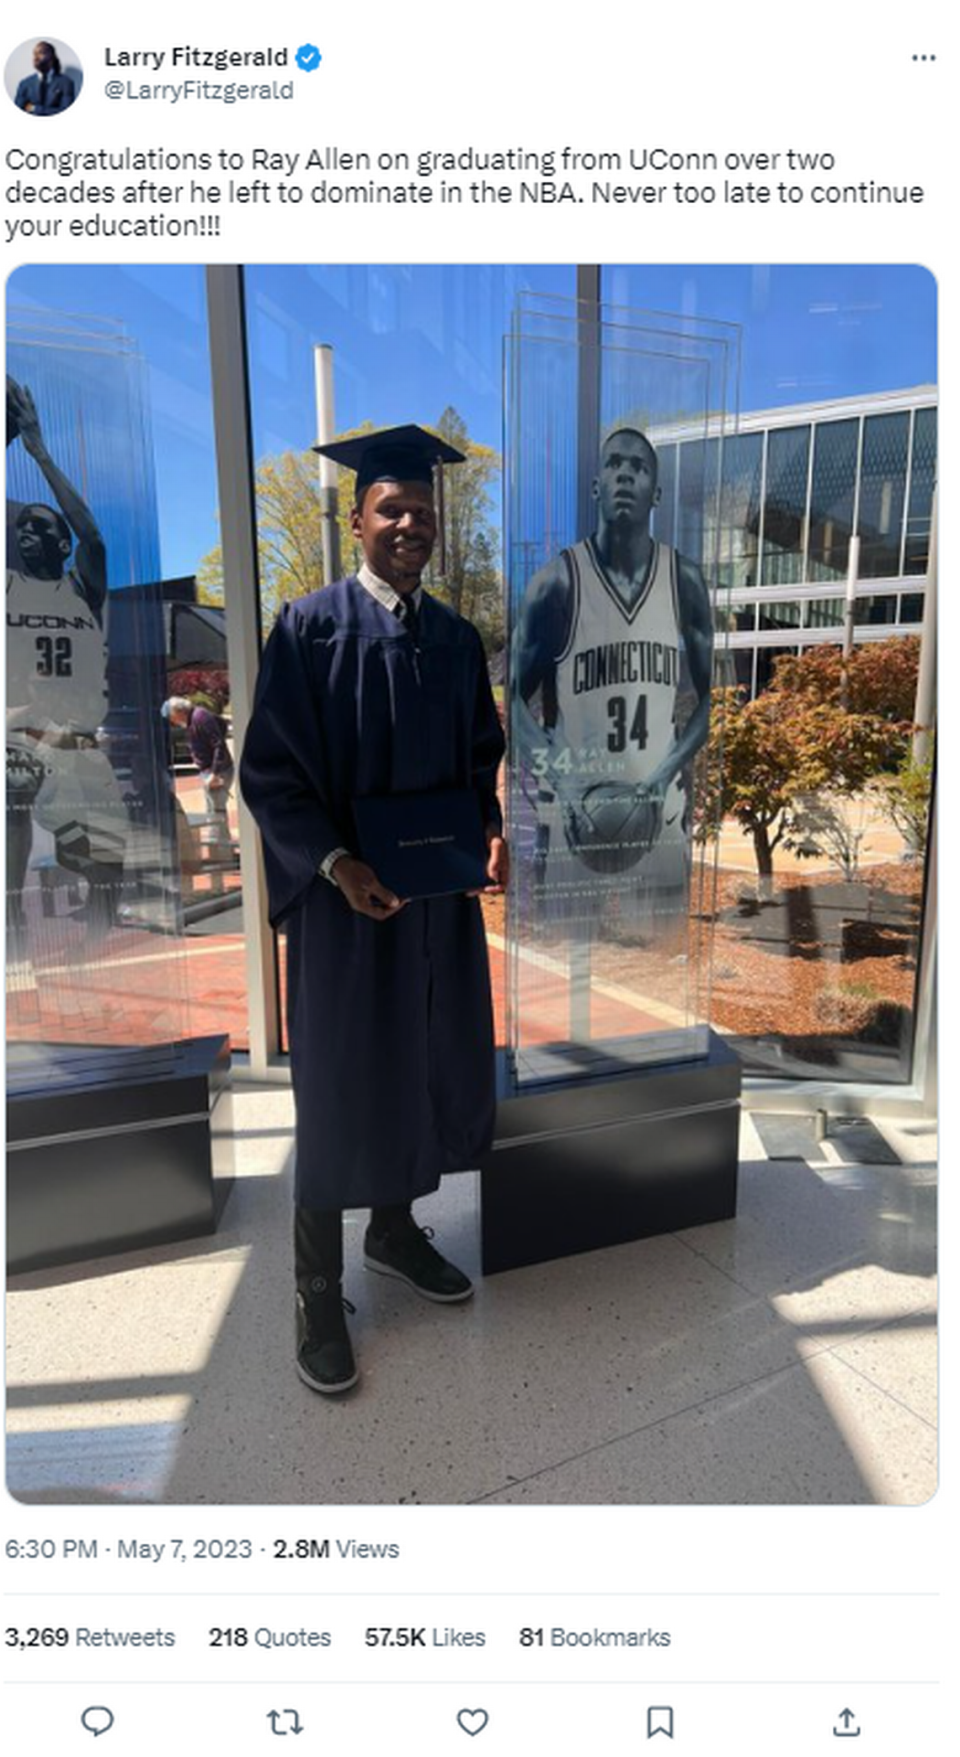 Former Miami Heat star Ray Allen graduated from UConn at age 47, more than two decades after leaving the school early to pursue his Hall of Fame career in the NBA. Screenshot Twitter @LarryFitzgerald